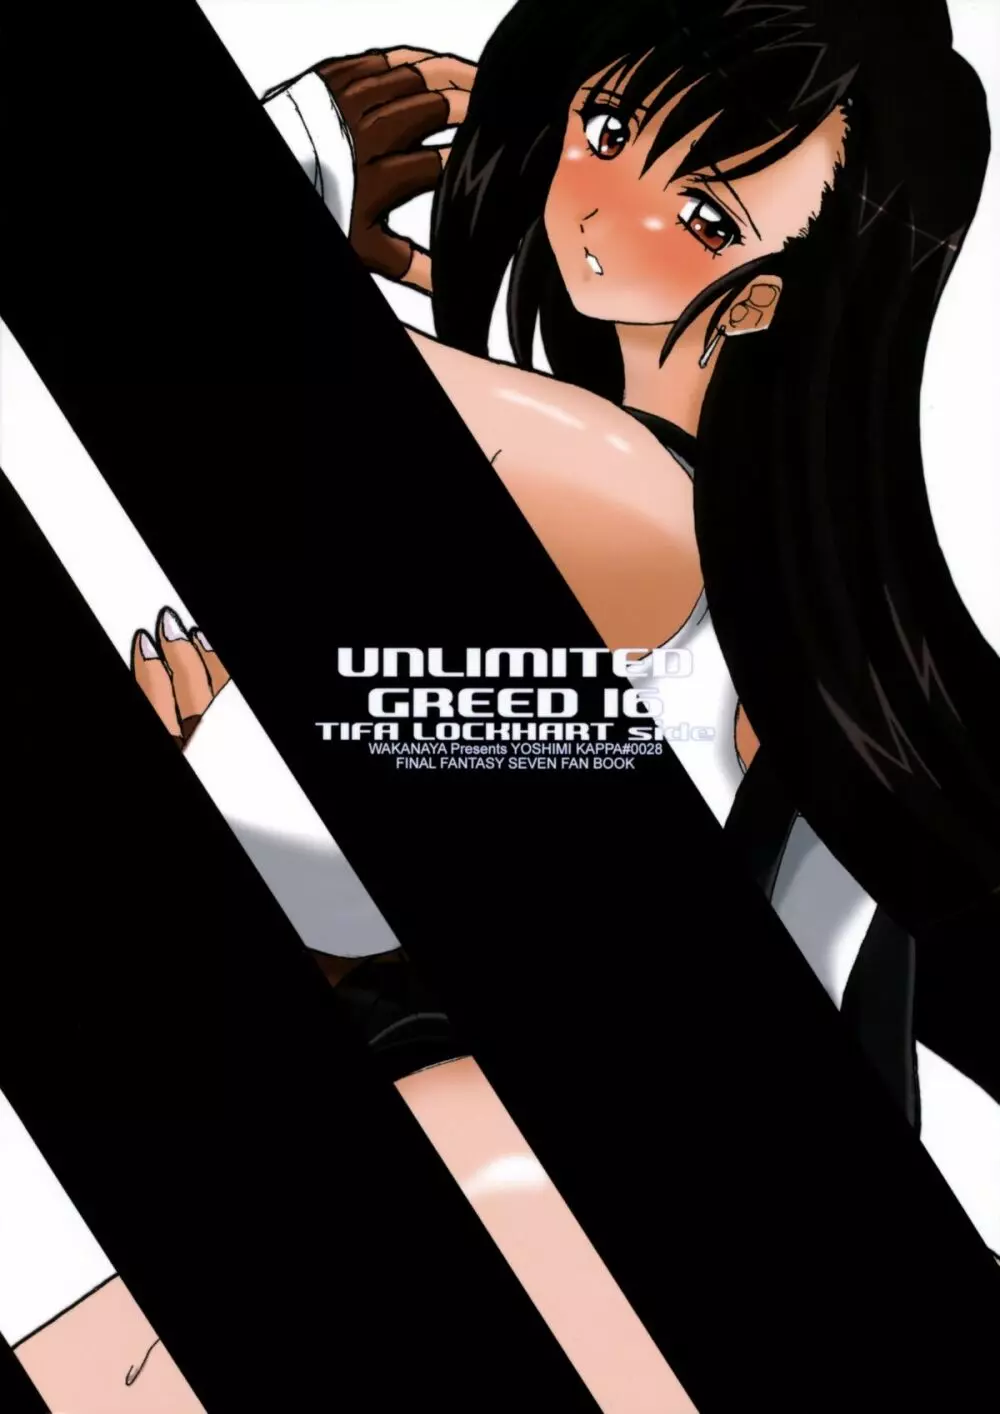 Unlimited Greed 16 Tifa Lockhart Side - page26